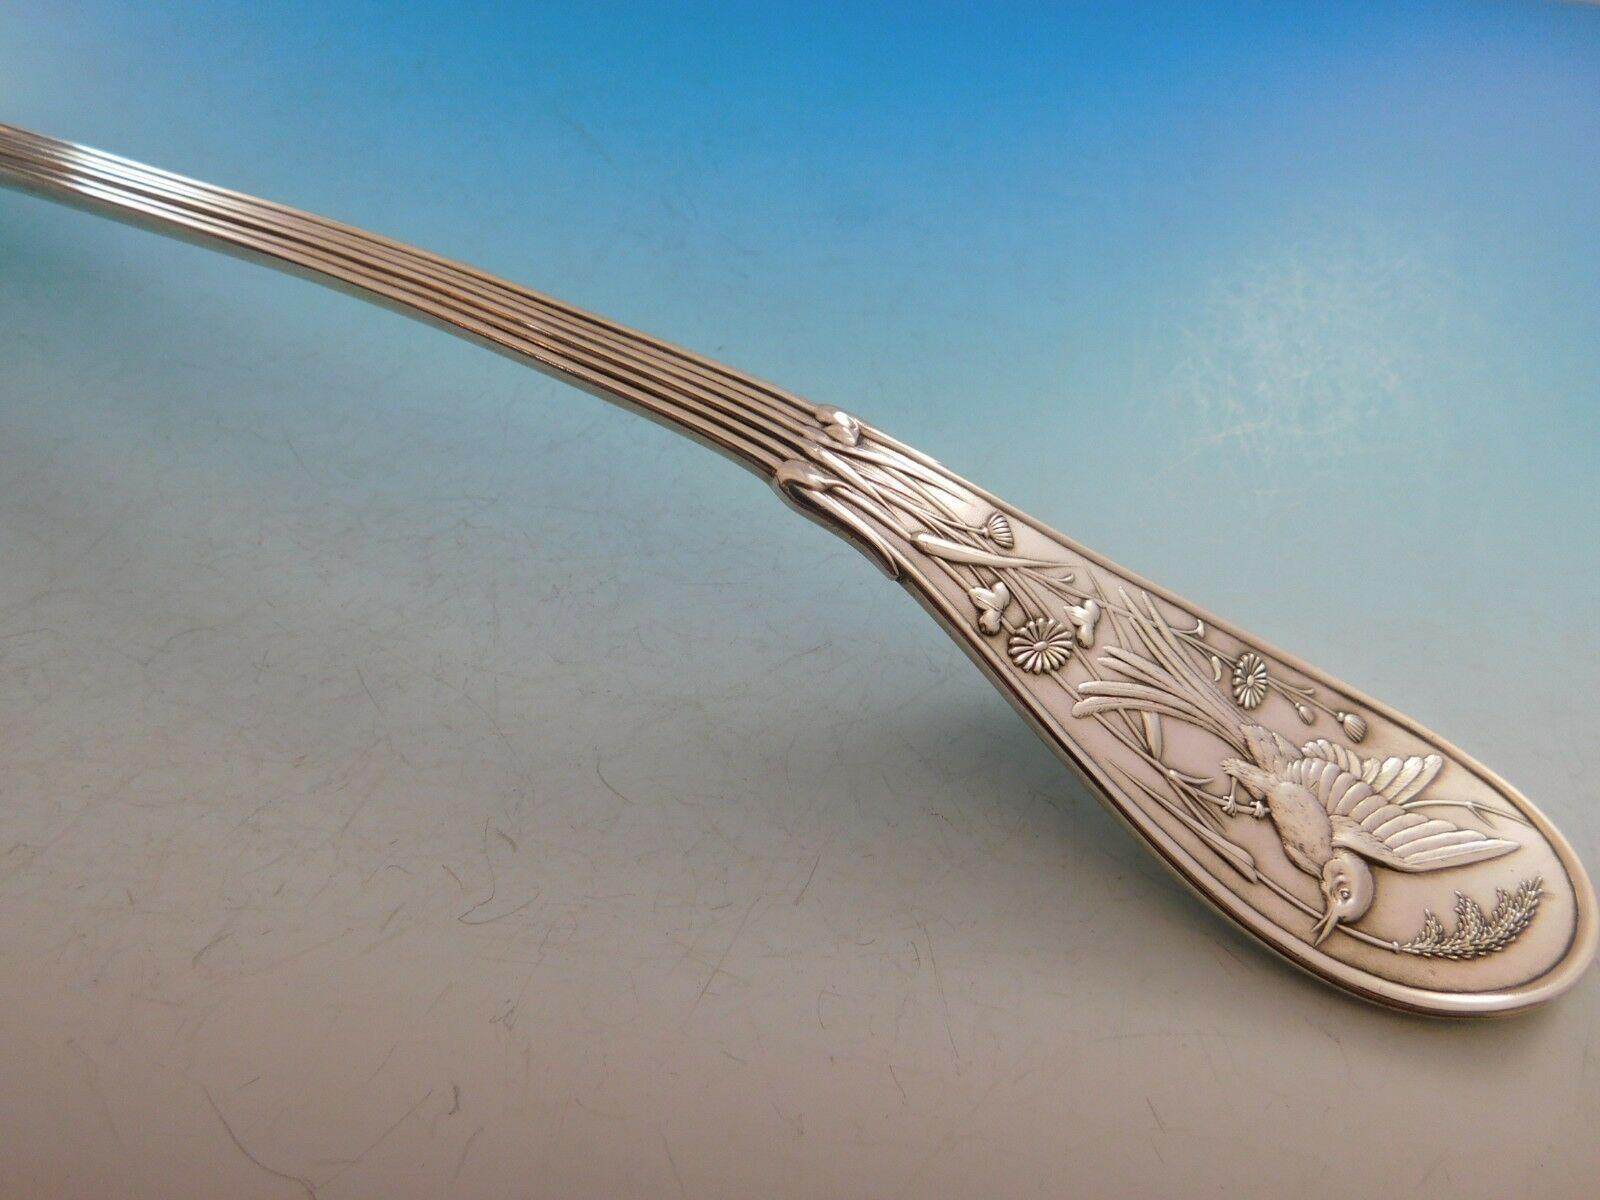 Japanese by Tiffany and Co.

Stunning sterling silver Soup Ladle measuring 12 3/4